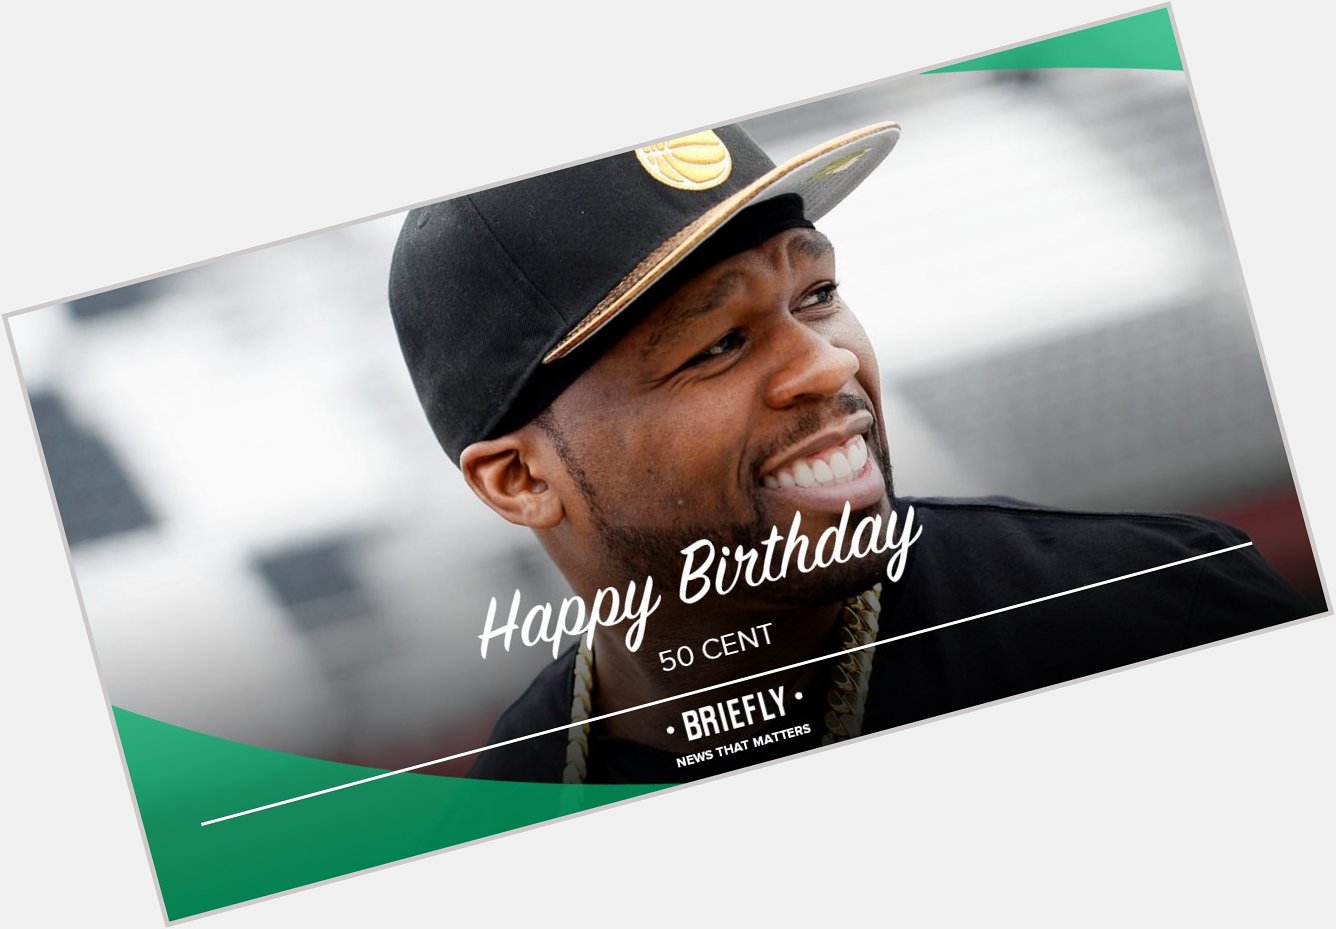 Wishing iconic rapper, 50 Cent a very happy birthday.     